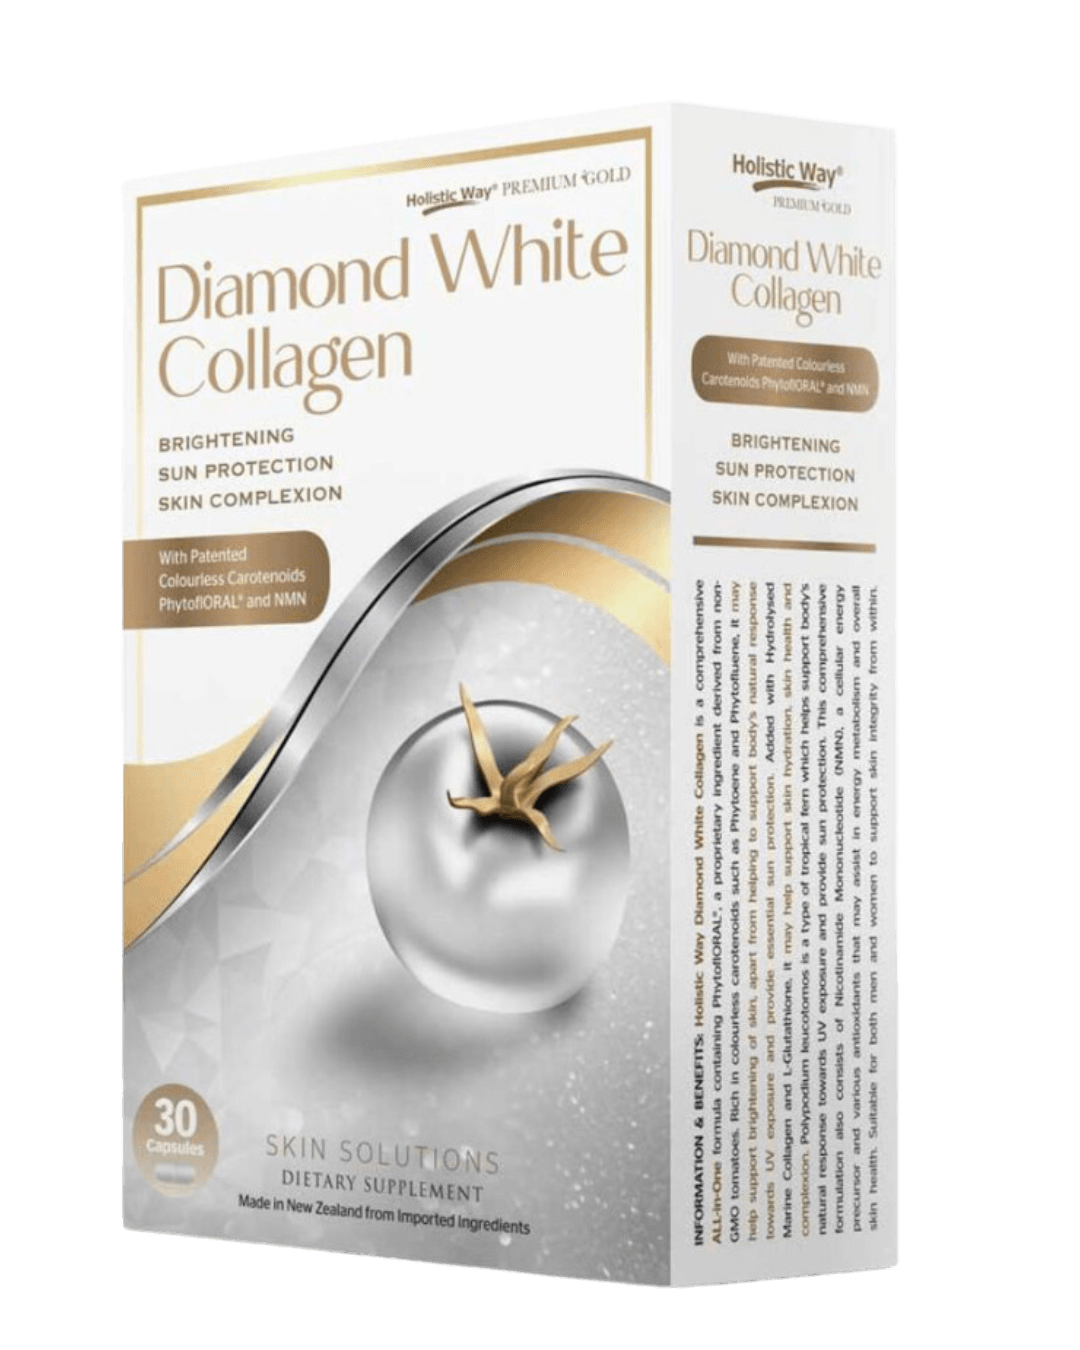 Daily Vanity Beauty Awards 2024 Best  Holistic Way Premium Gold Diamond White Collagen Voted By Beauty Experts